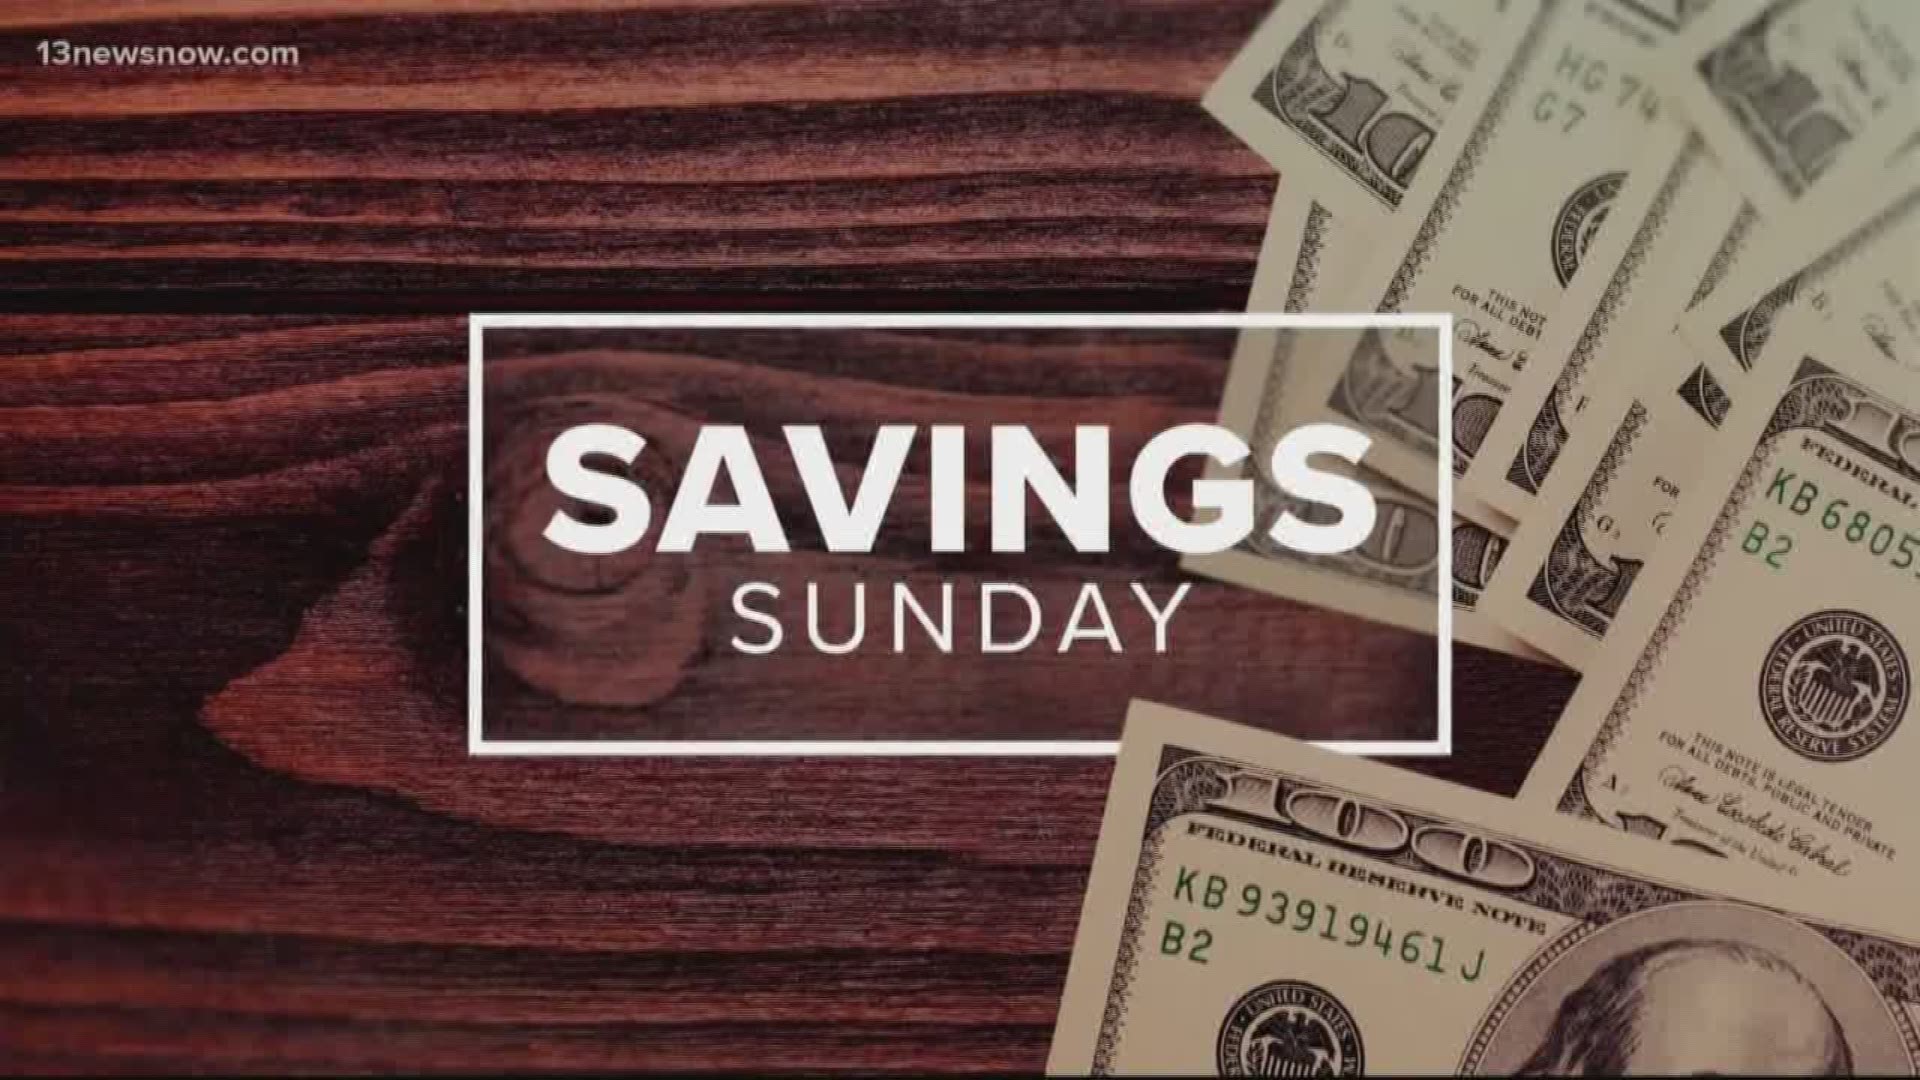 Laura Oliver from www.afrugalchick.com has your big savings for the week of Feb. 24, 2019.